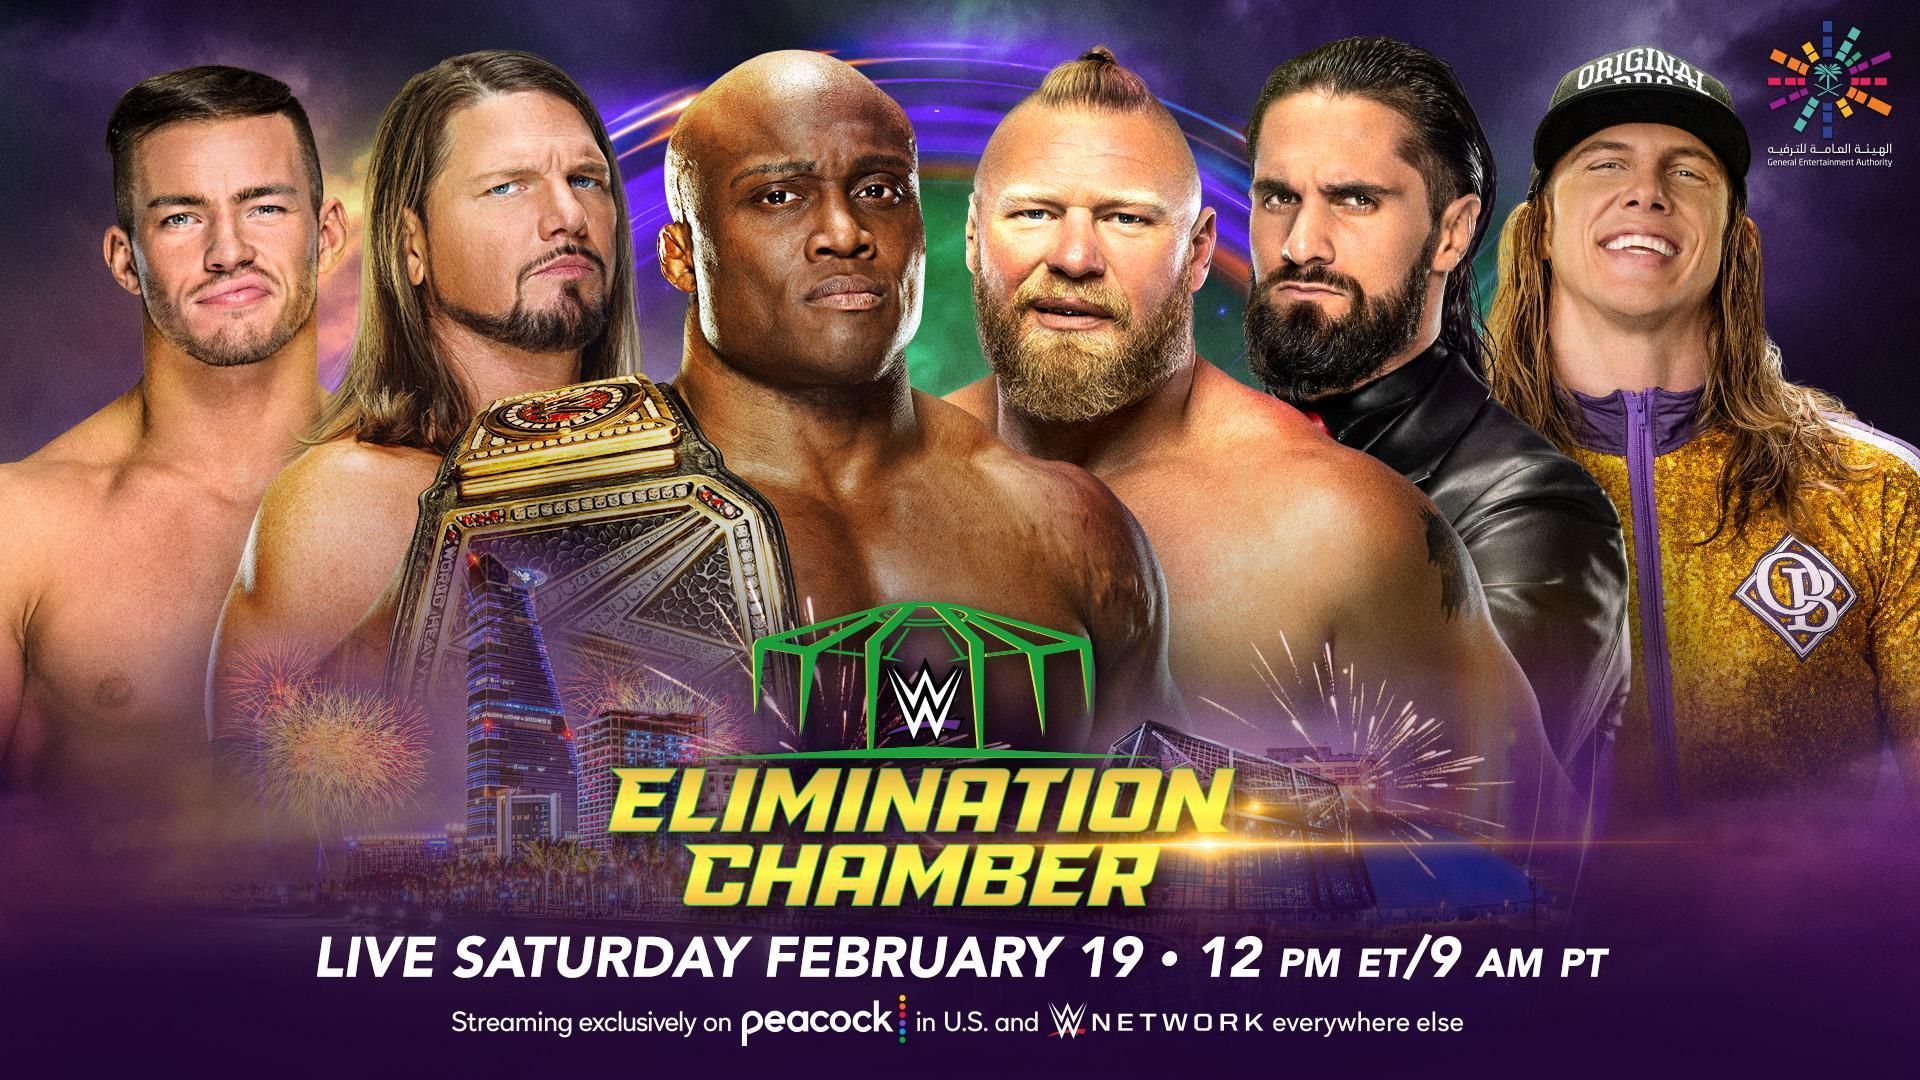 A WWE Championship Elimination Chamber match will take place at the event